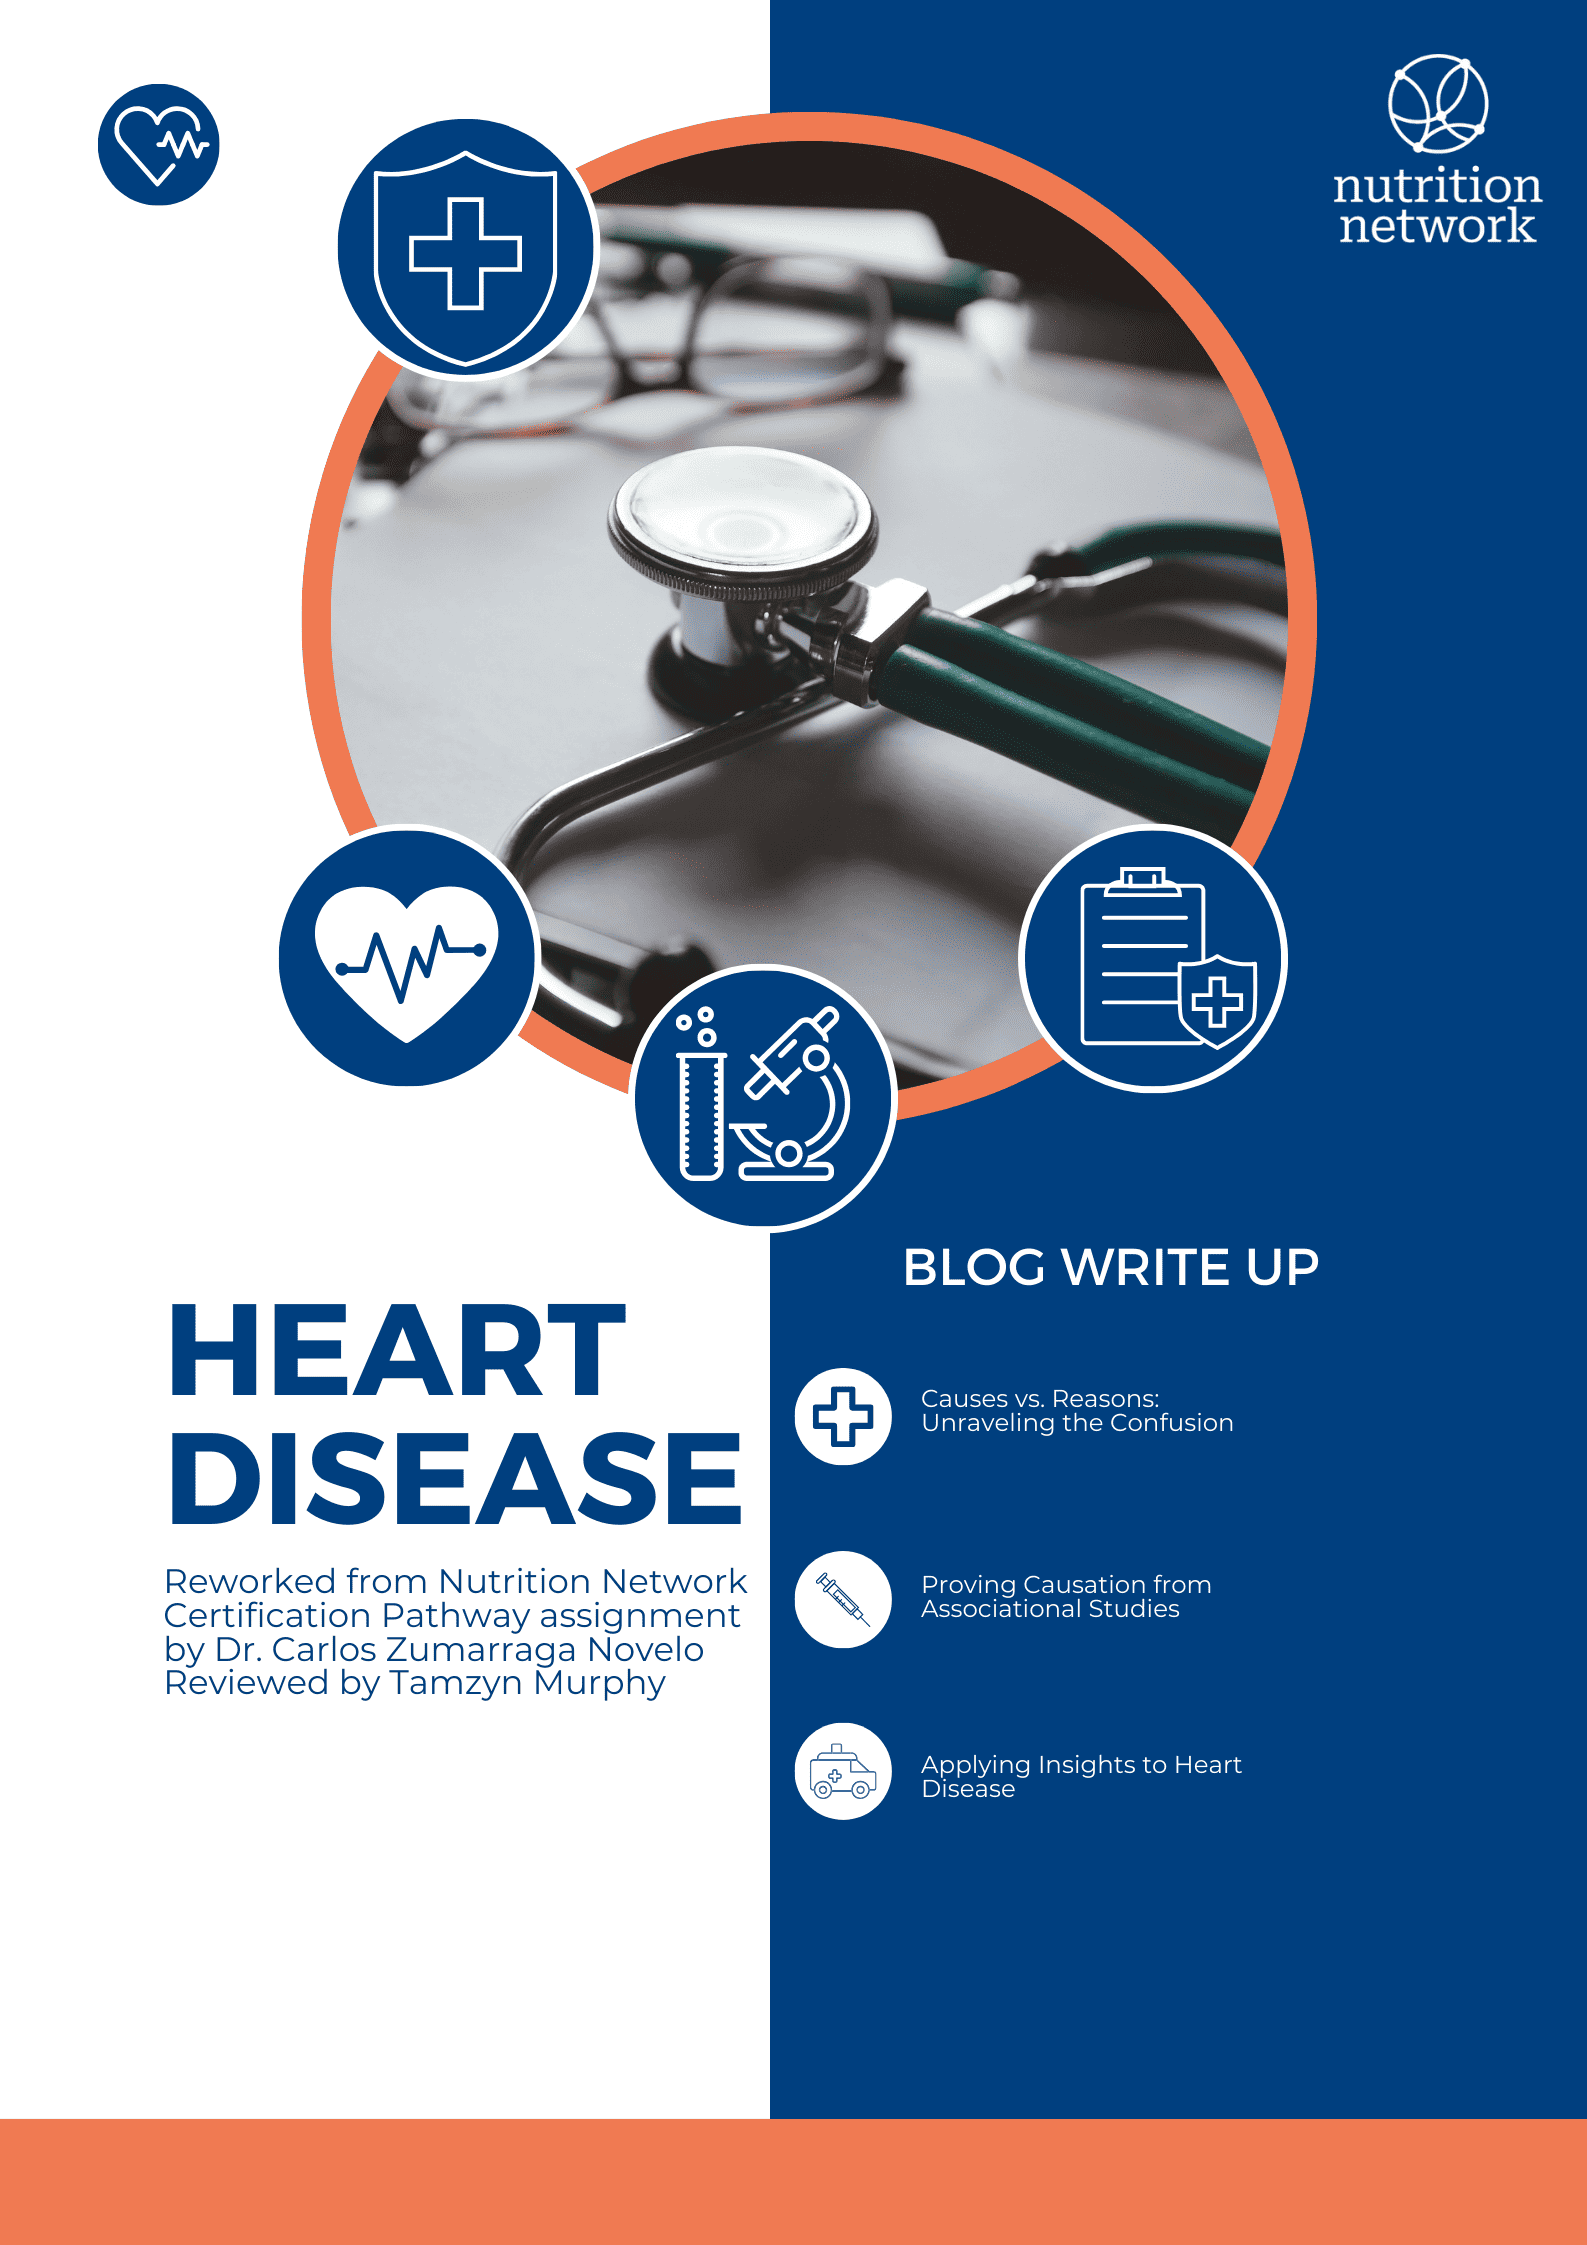 Causes vs. Reasons: Deciphering the Puzzle of Heart Disease